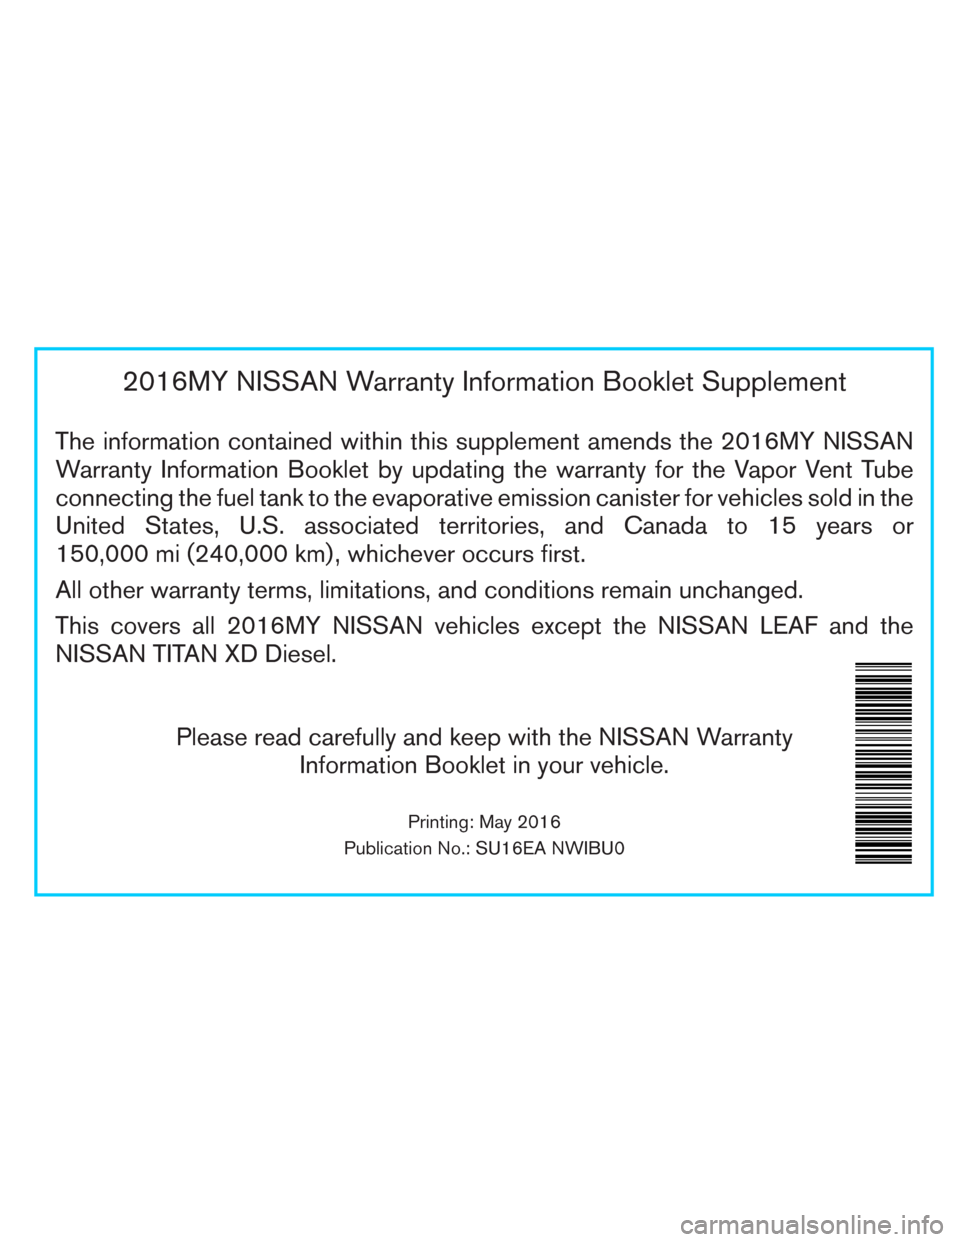 NISSAN MAXIMA 2016 A36 / 8.G Warranty Booklet 2016MY NISSAN Warranty Information Booklet Supplement
The information contained within this supplement amends the 2016MY NISSAN
Warranty Information Booklet by updating the warranty for the Vapor Vent